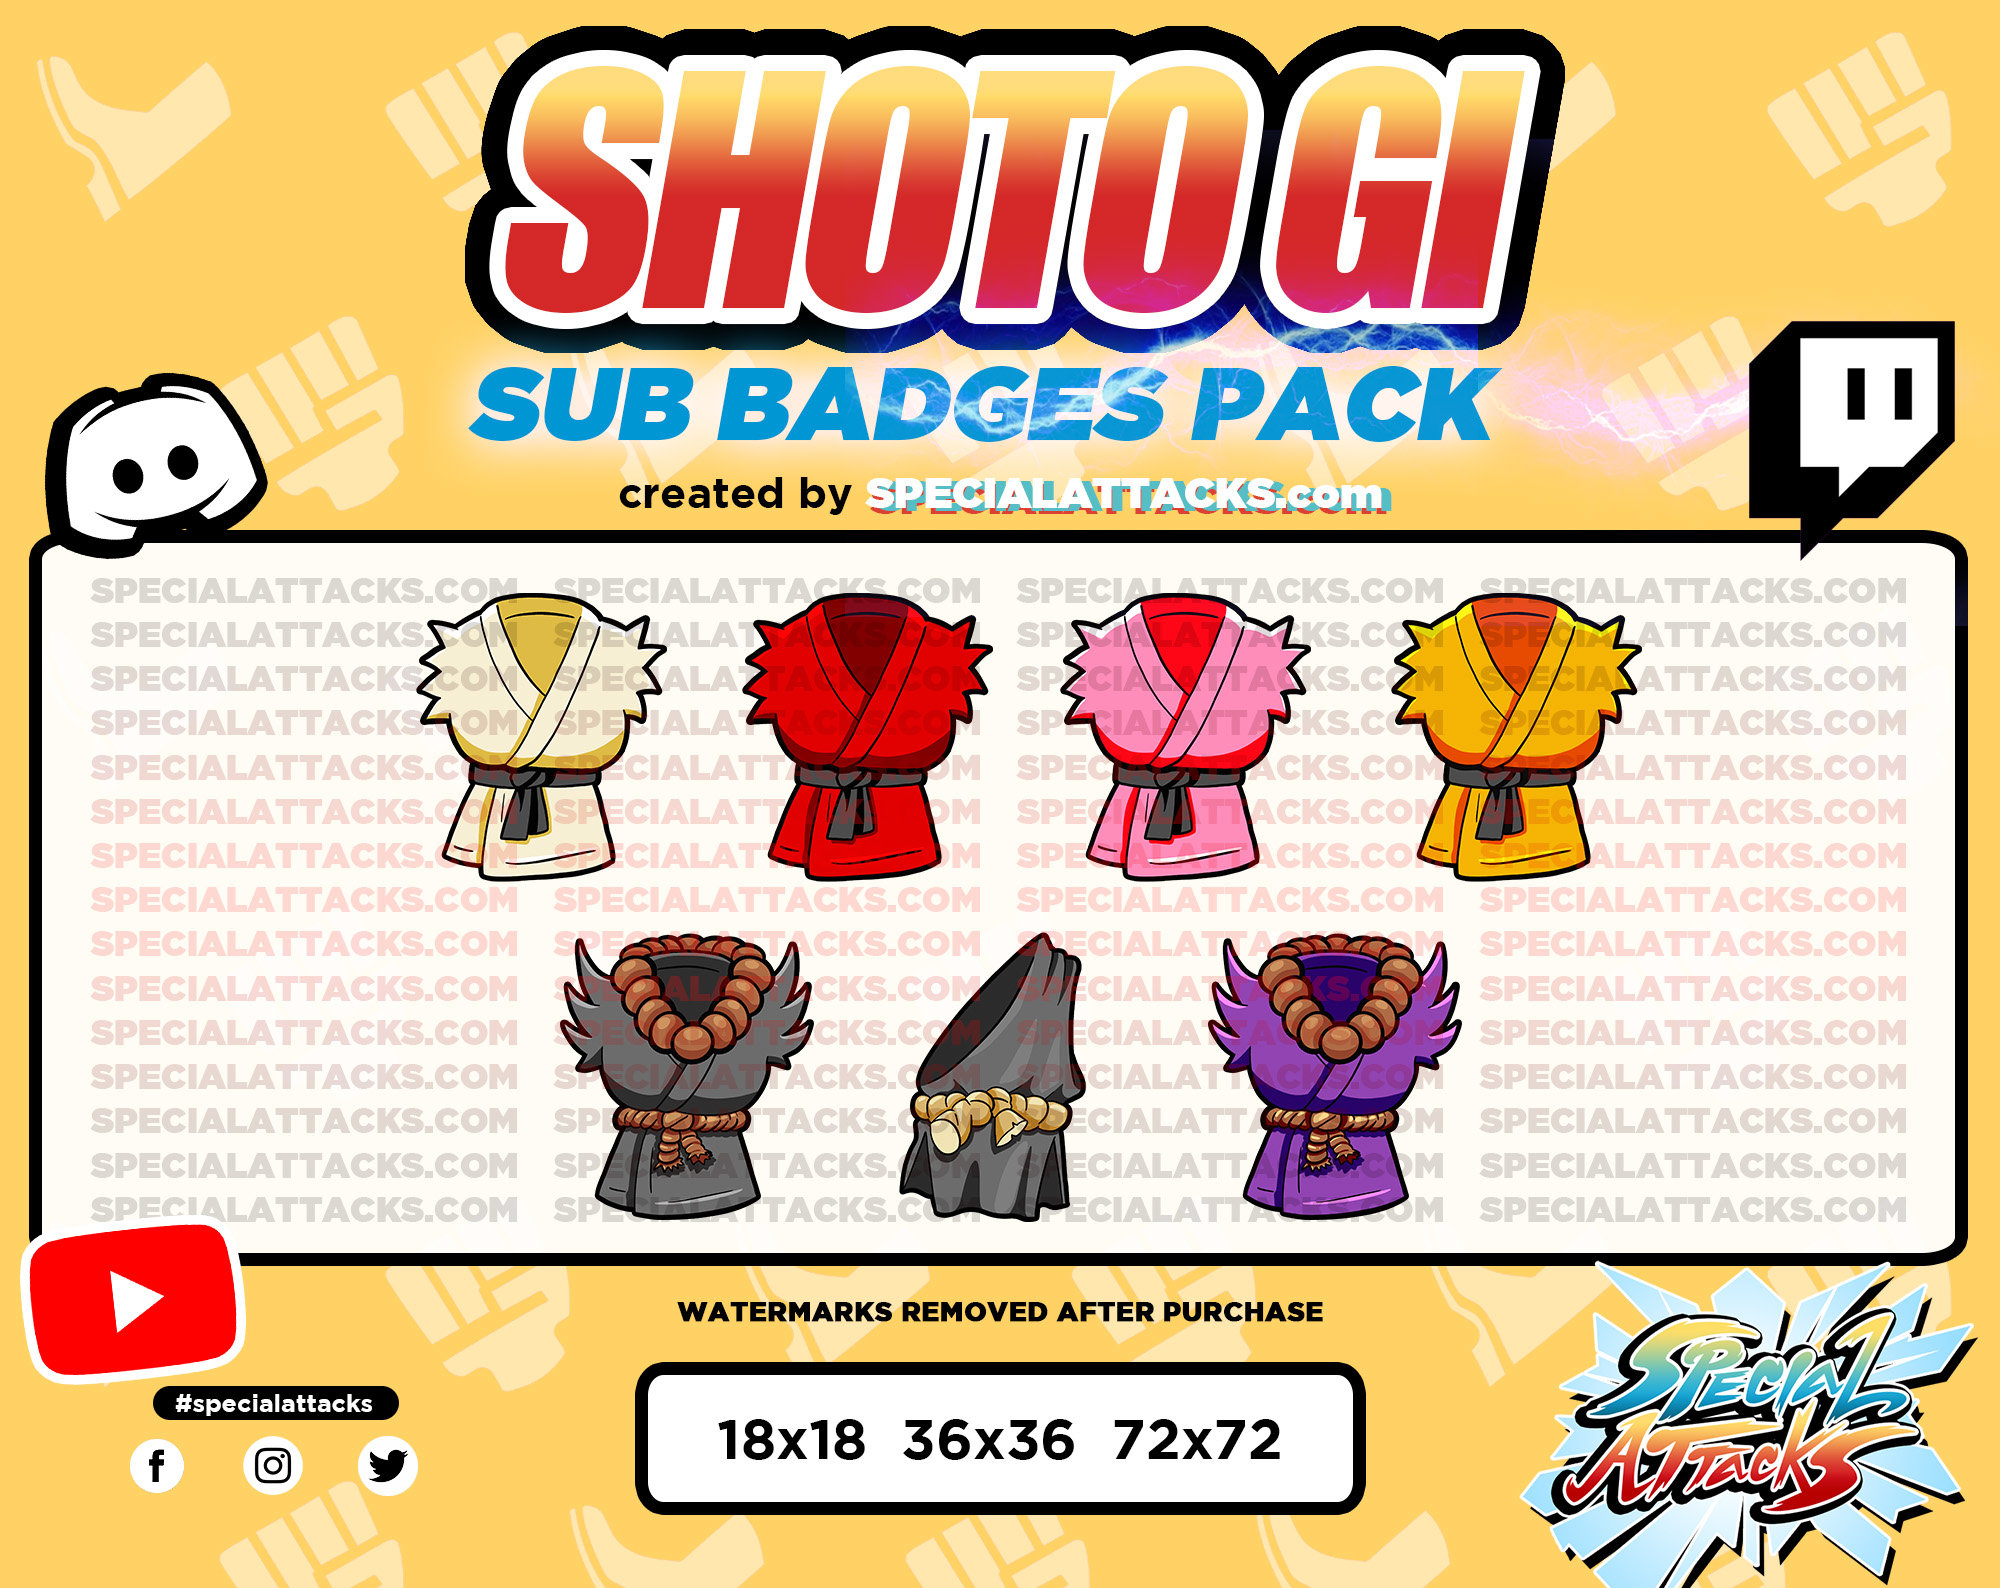 12 Ryu from Street Fighter Emotes for Twitch Streamers, Discord,  -  Cute - Anime - Chibi - Emote Bundle - Emote Pack